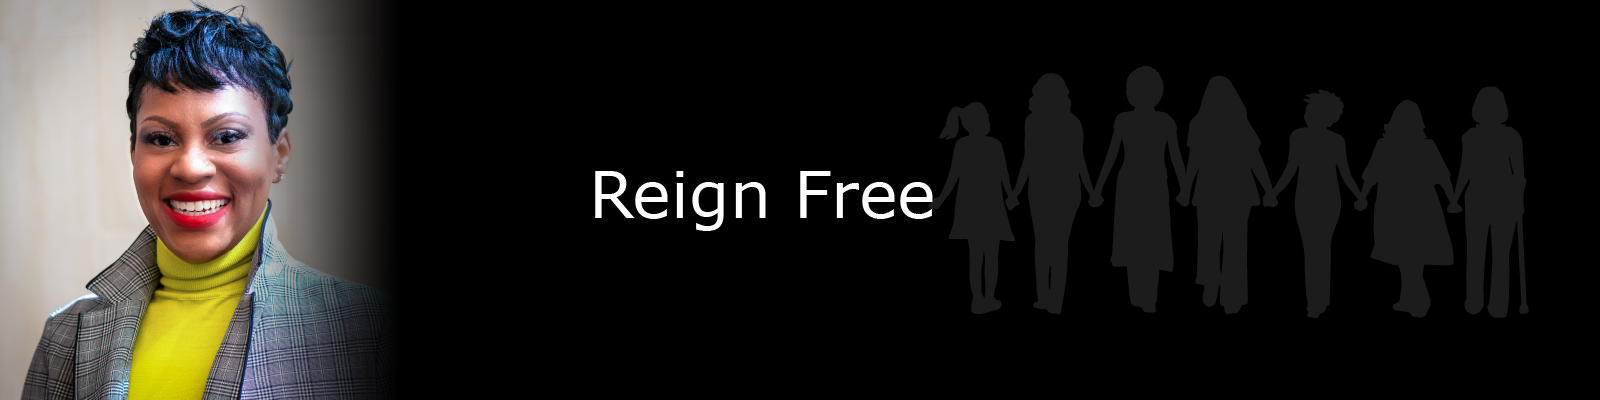 Photo of Reign Free.